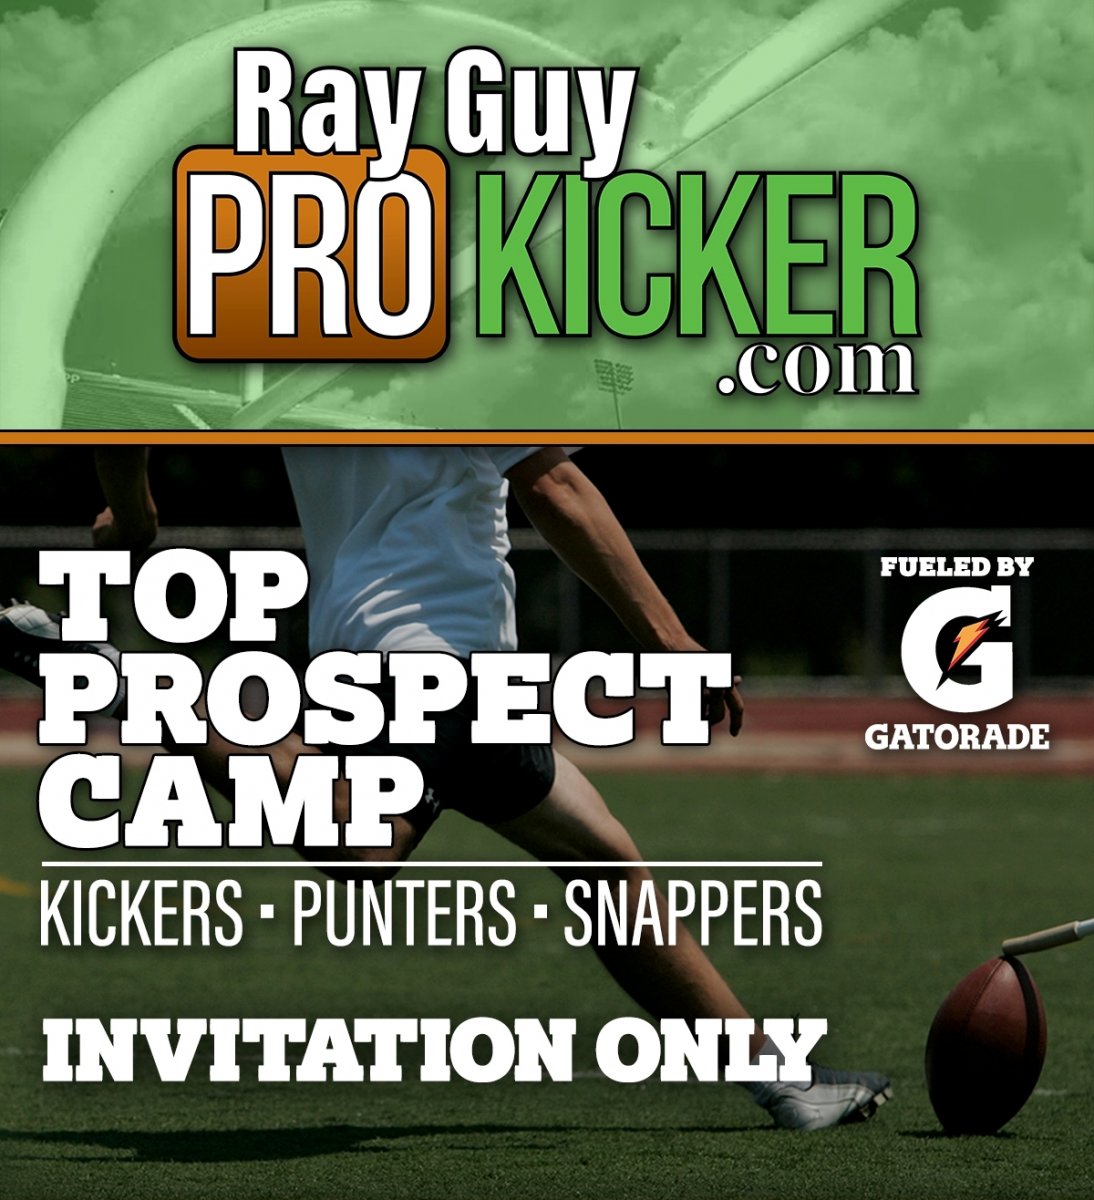 Ray Guy Top Prospect Camp for Kickers and Punters